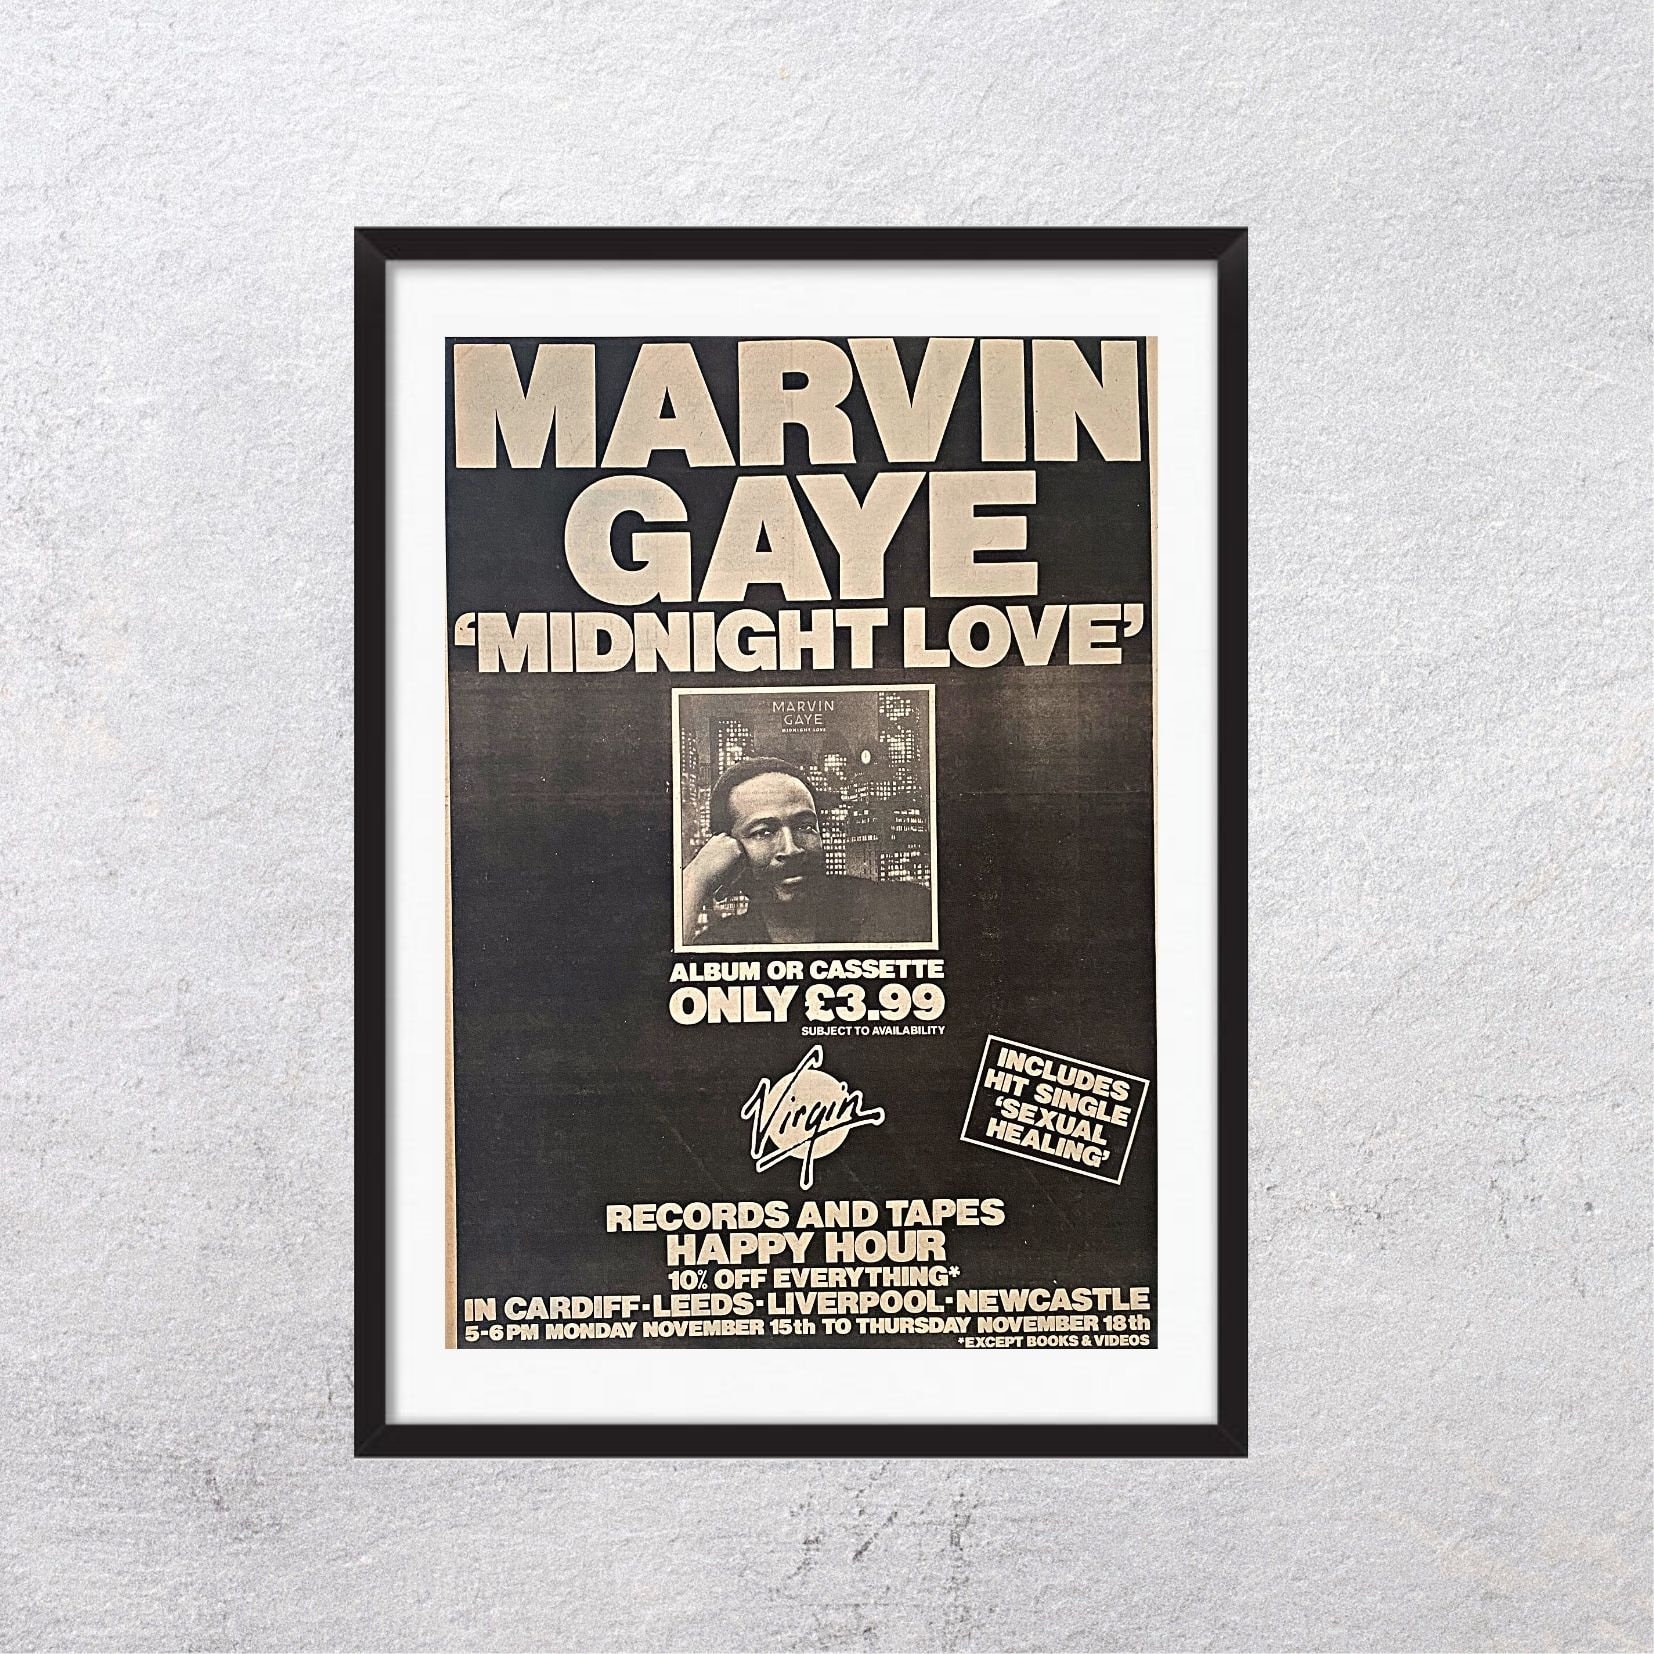 Marvin Gaye What's Going on Autographed Vinyl Record Framed 